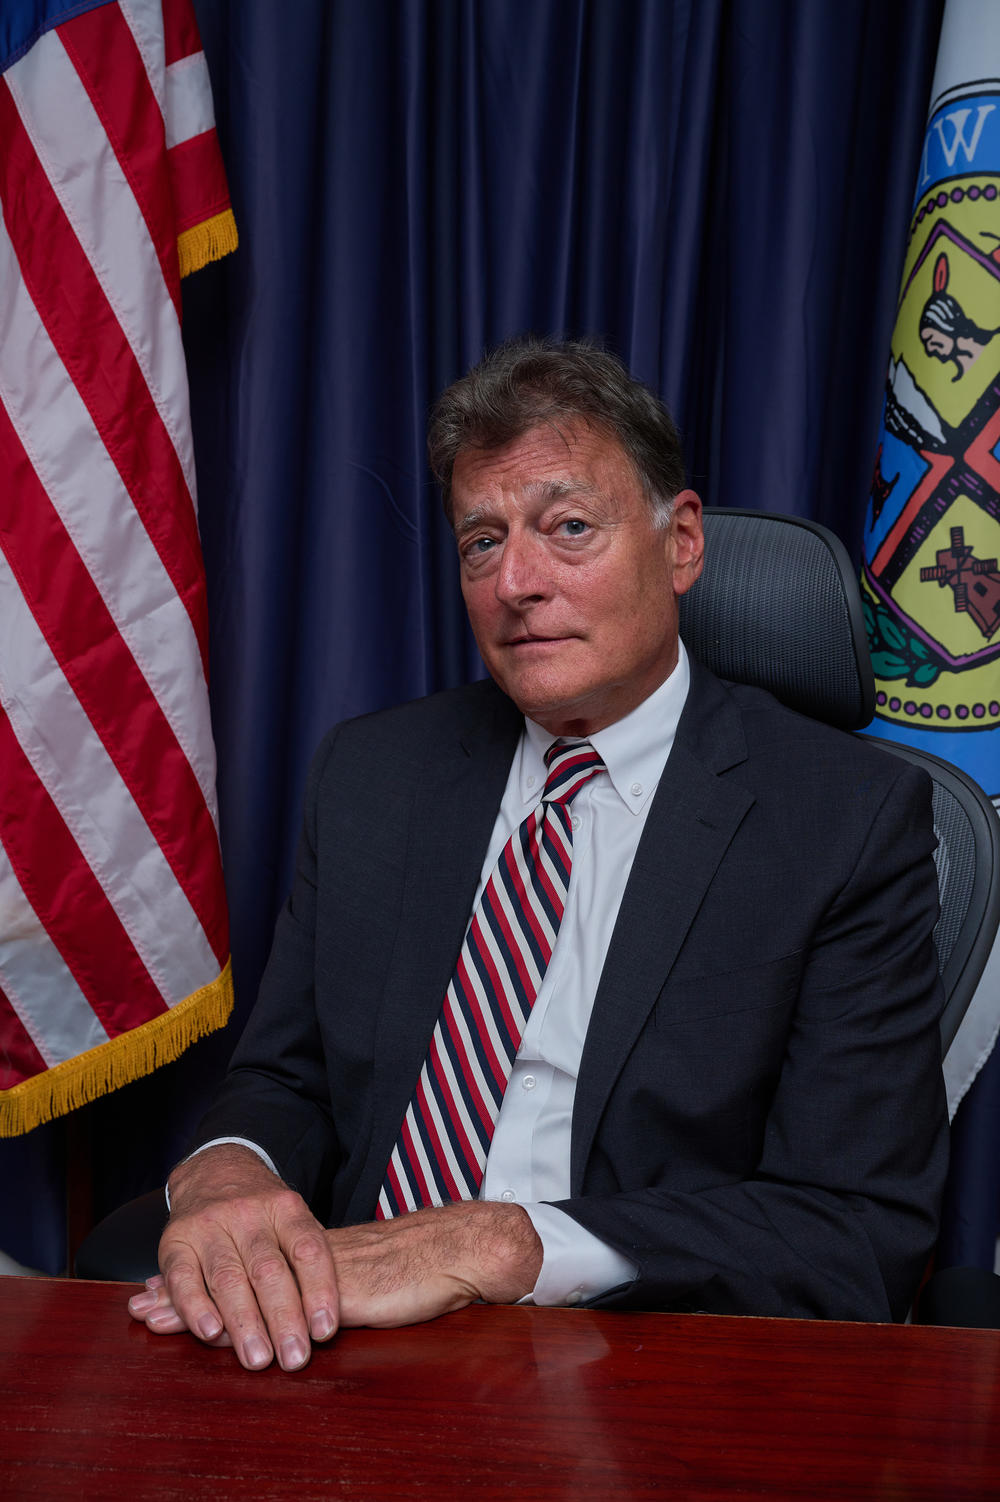 Peter Crummey, the town supervisor for Colonie, N.Y., filed a lawsuit against Mayor Eric Adams of New York City for busing newly arrived migrants to his village.